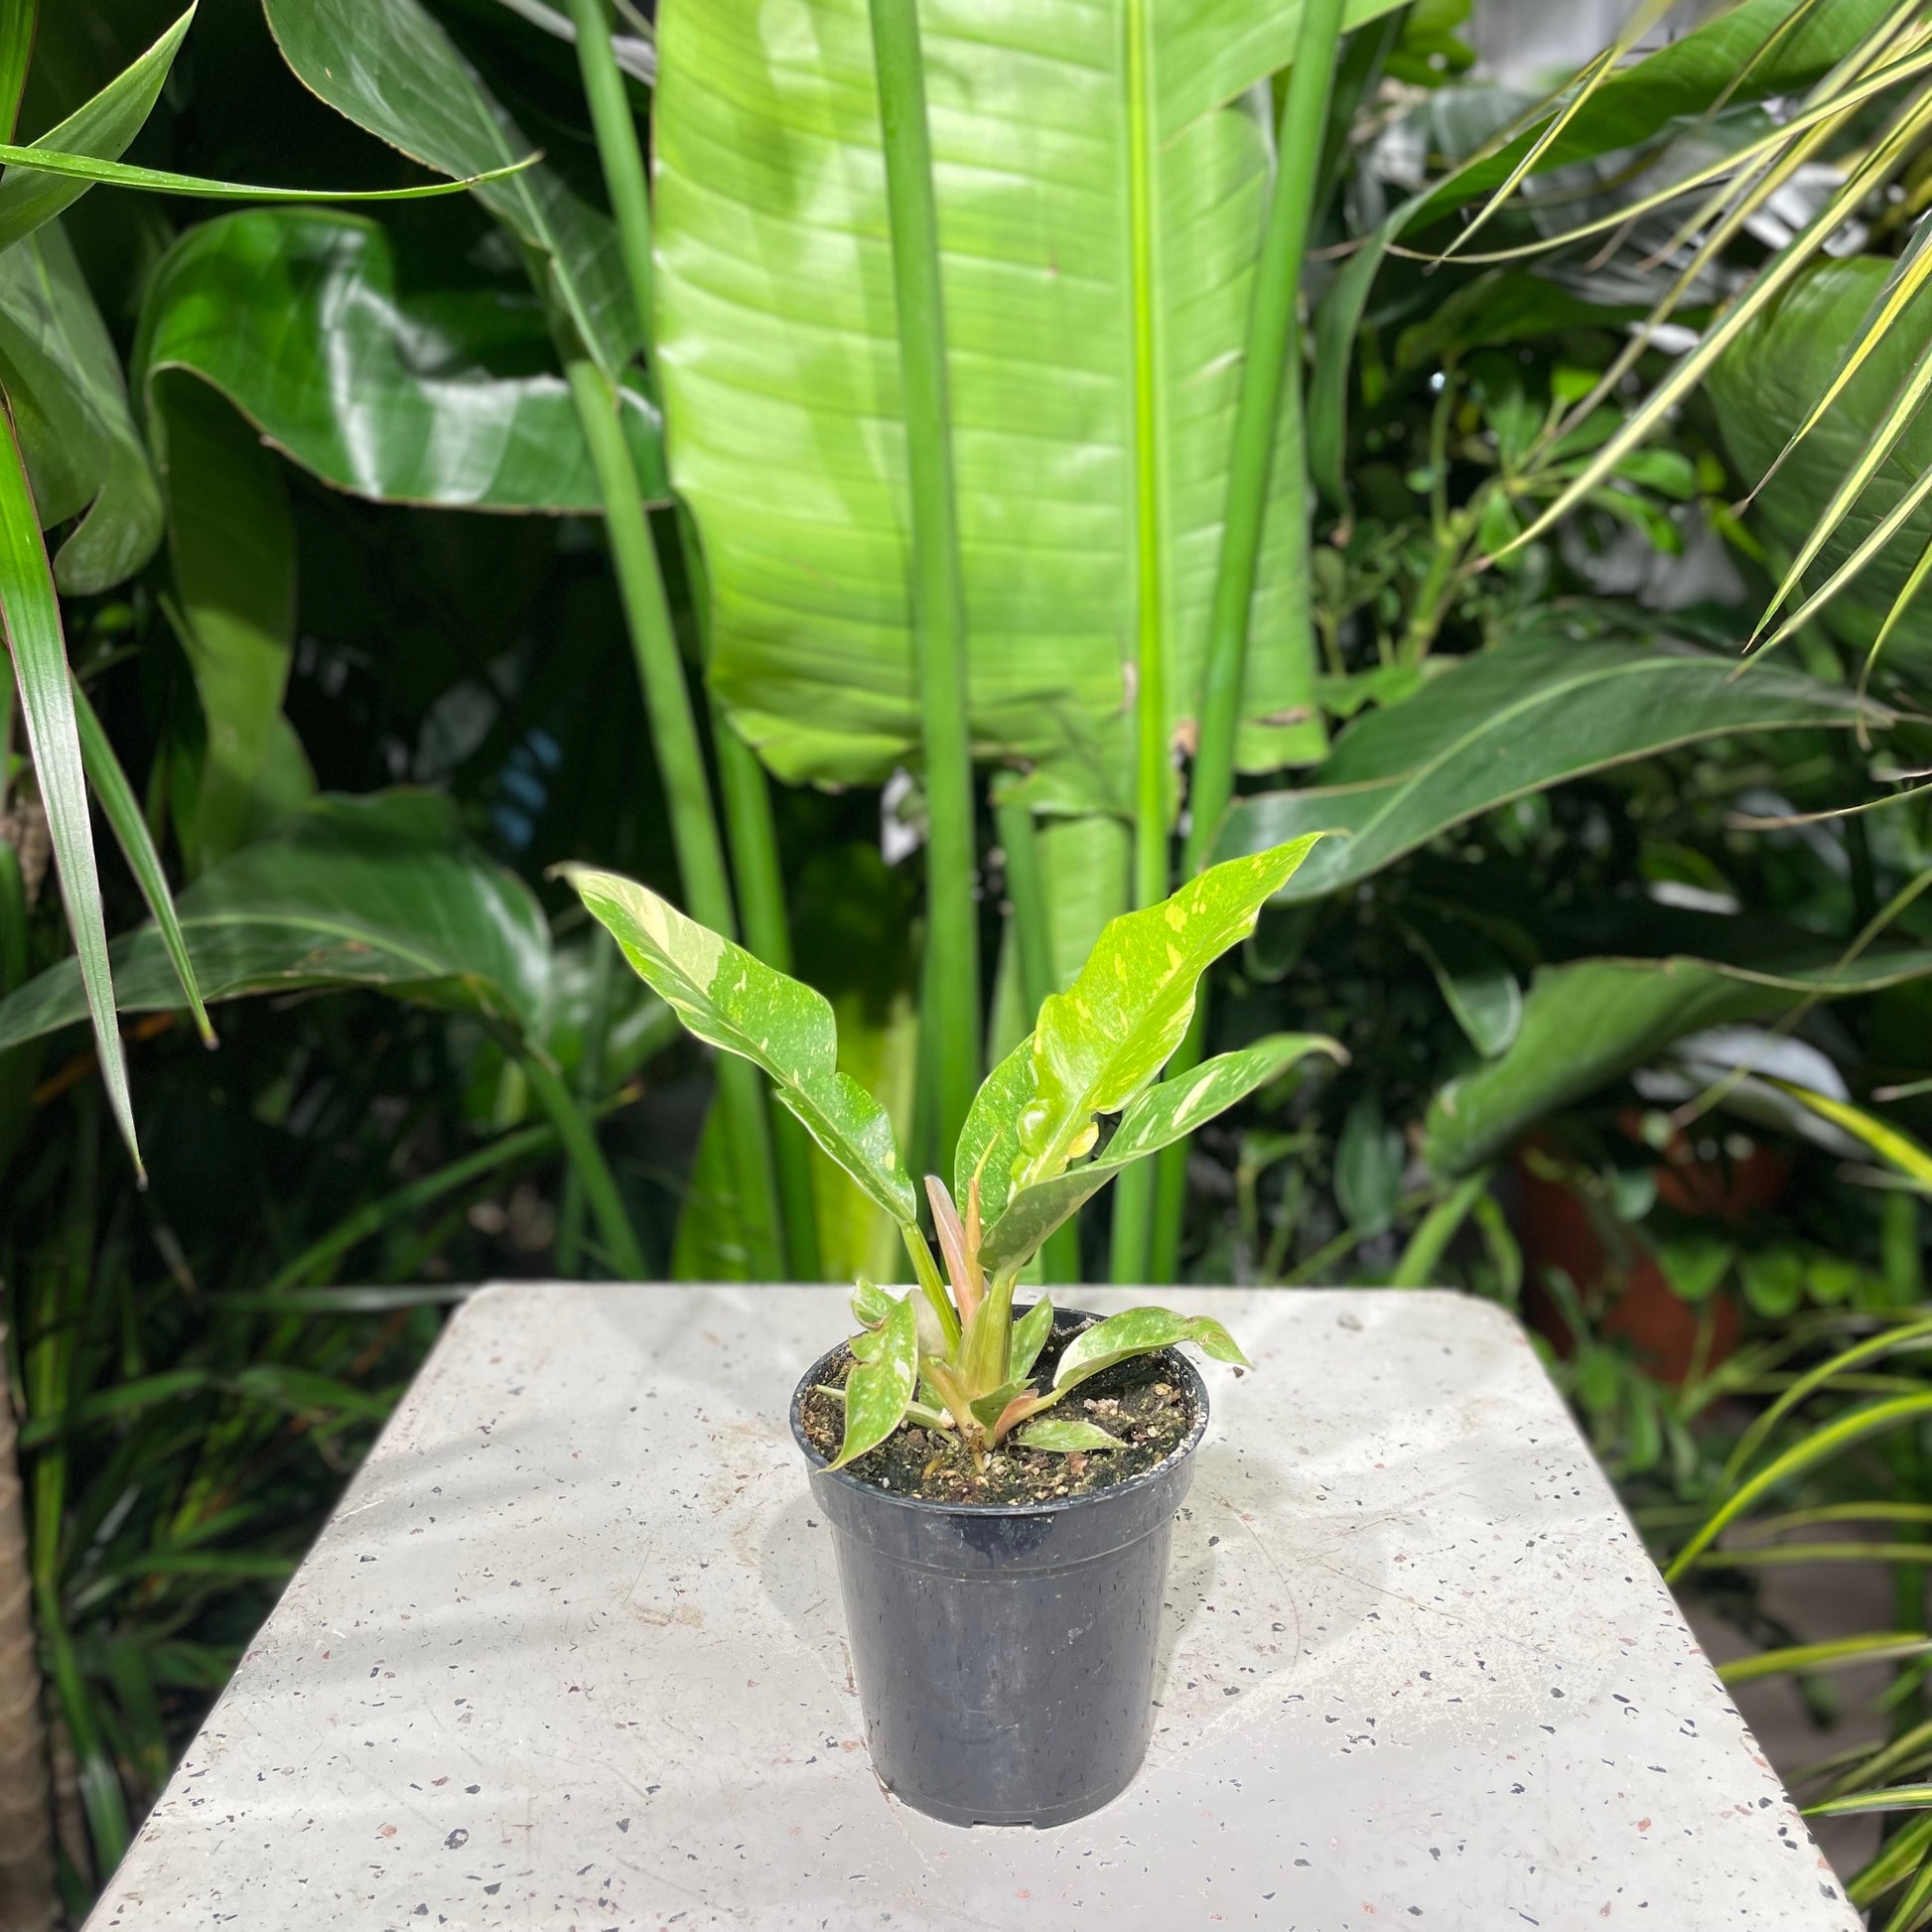 Philo Ring of Fire (Philodendron micans) in a 4 inch pot. Indoor plant for sale by Promise Supply for delivery and pickup in Toronto